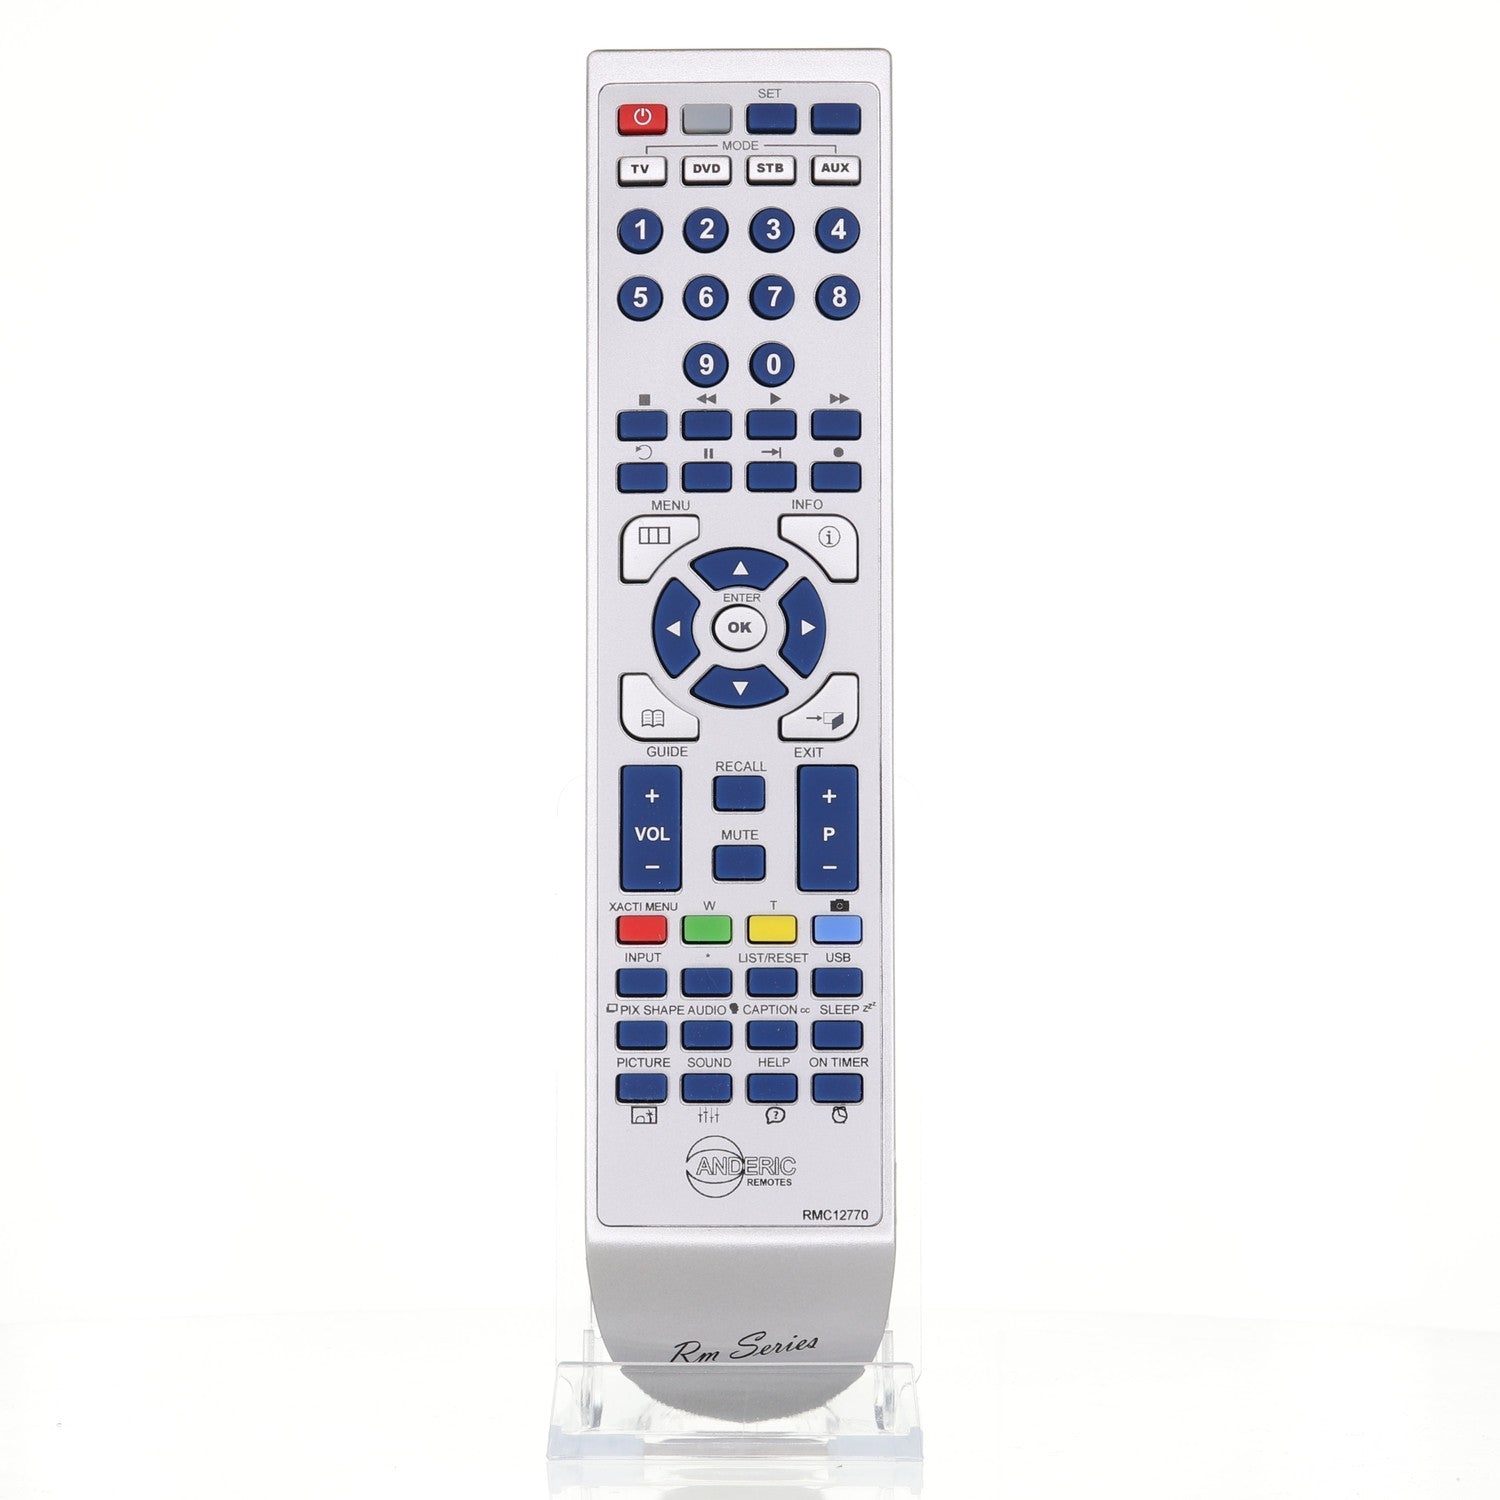 RMC12770 (GXDB) Remote Control for Sanyo® TVs